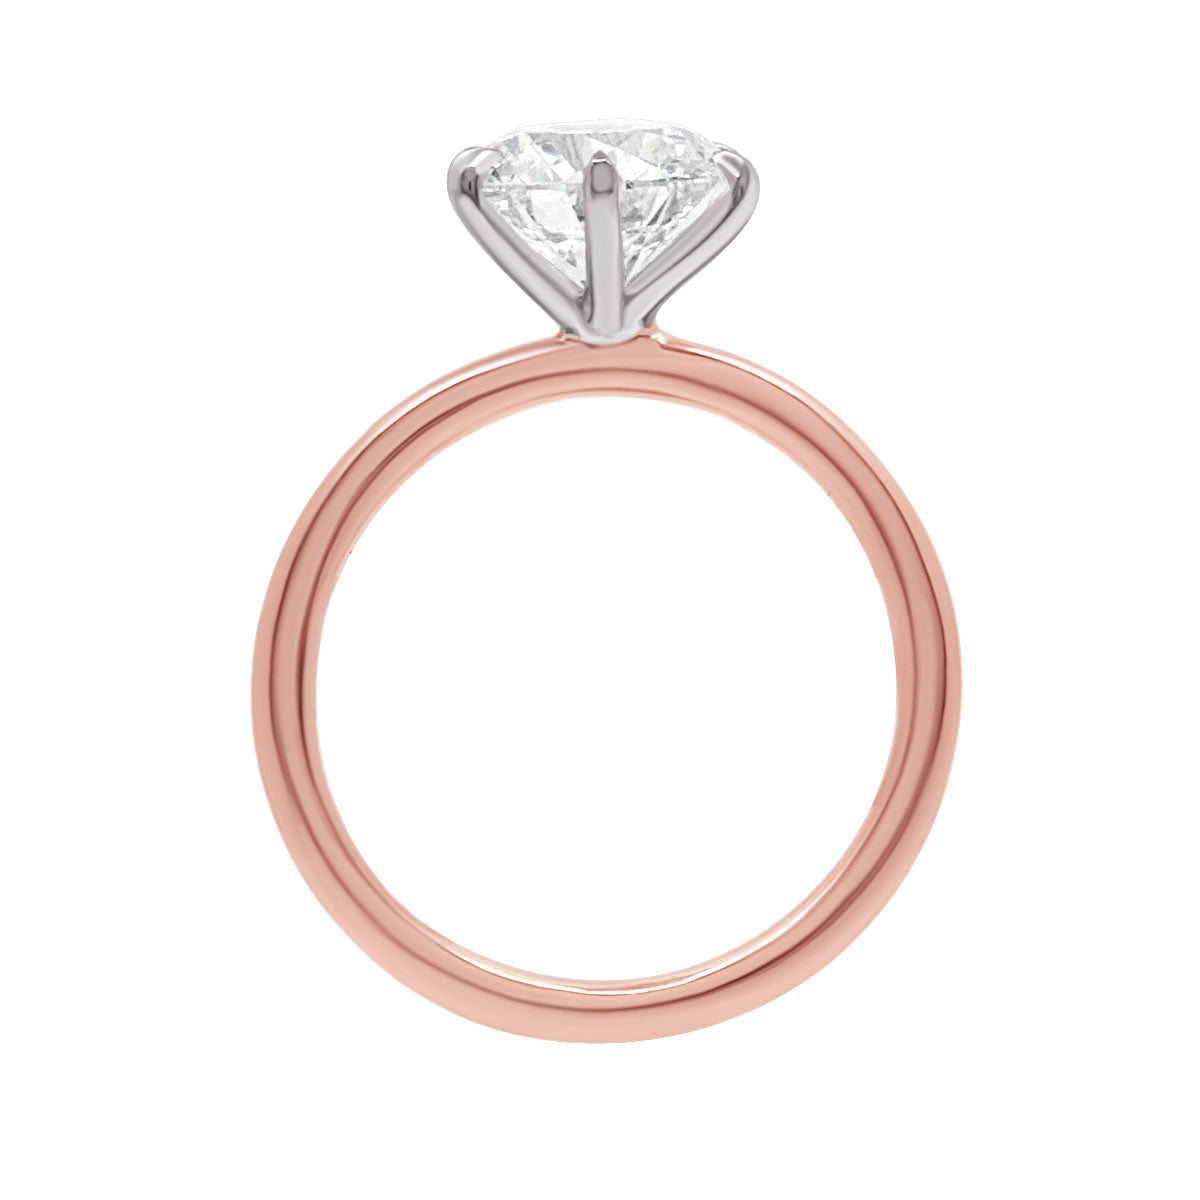 Talon Claw Solitaire in rose and white gold standing upright